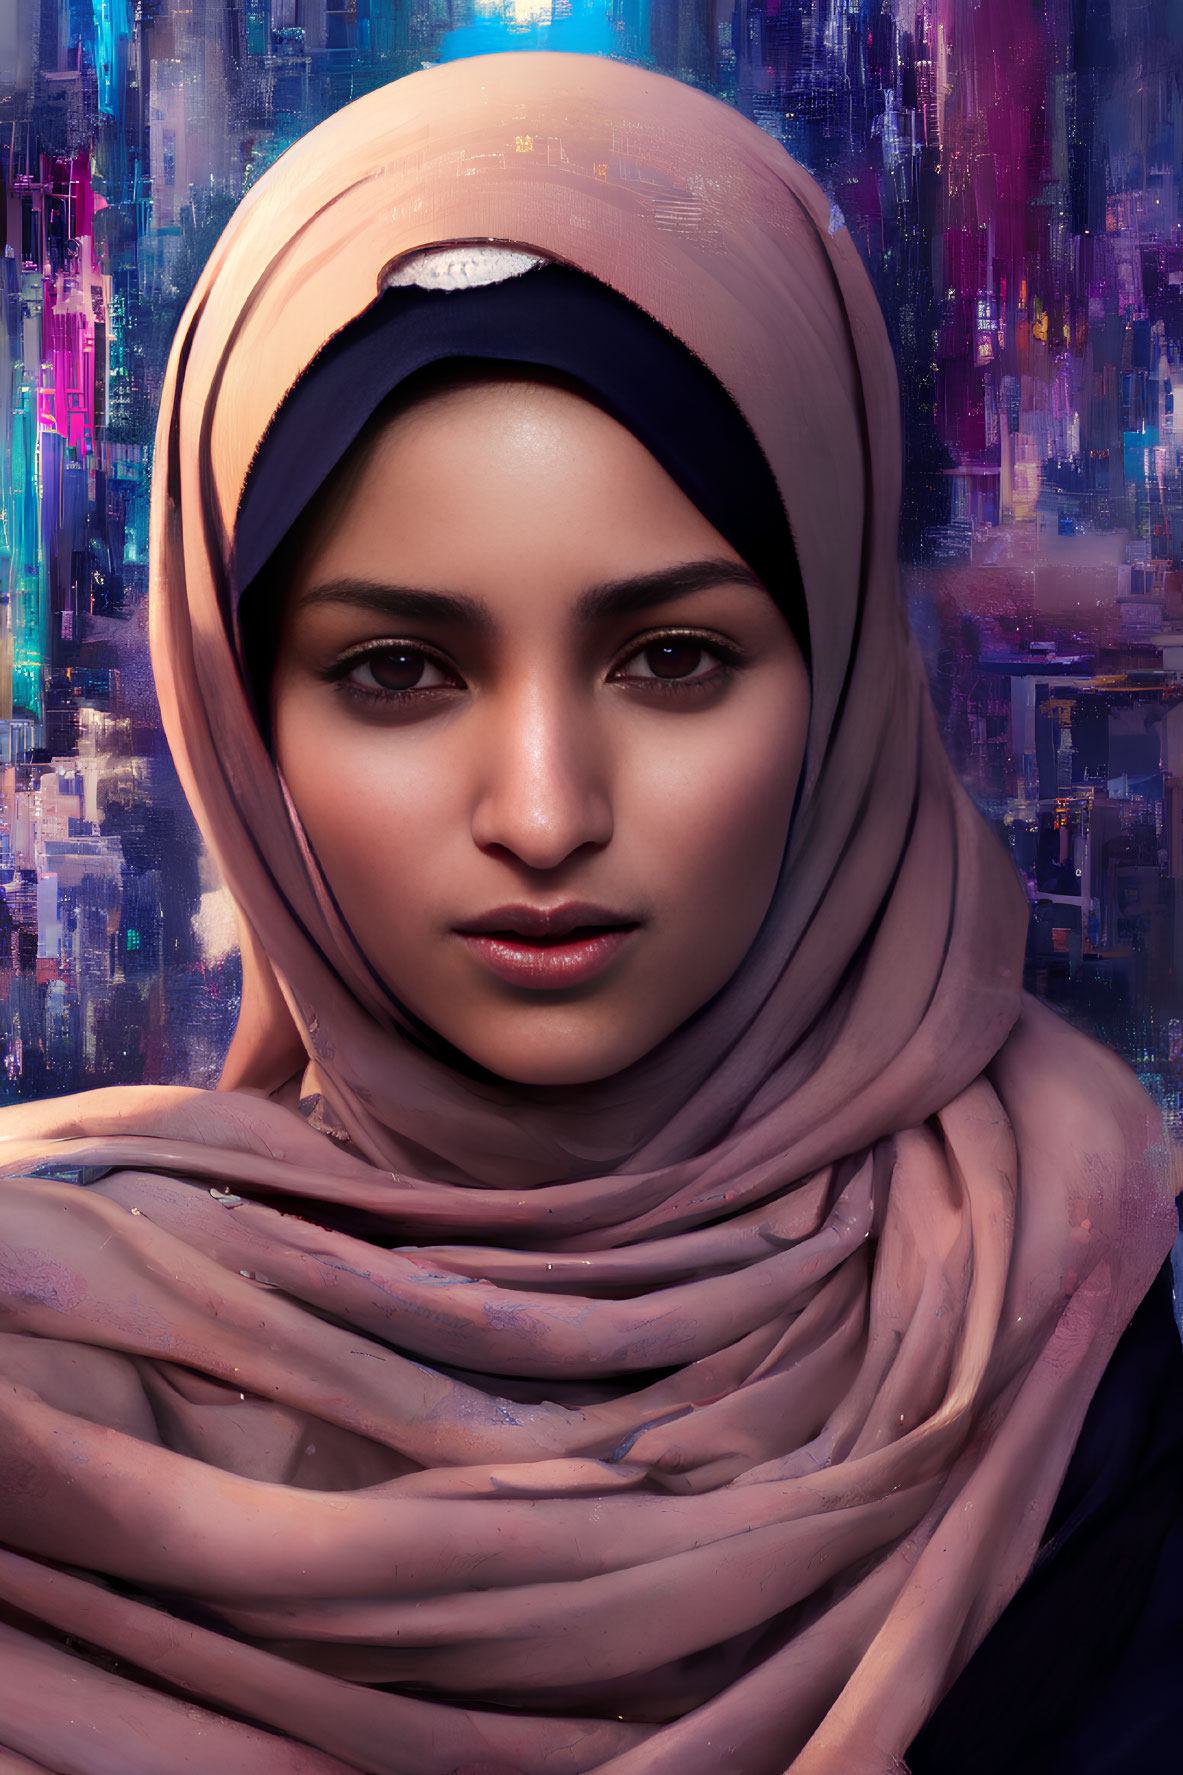 Woman in hijab against vibrant cityscape.